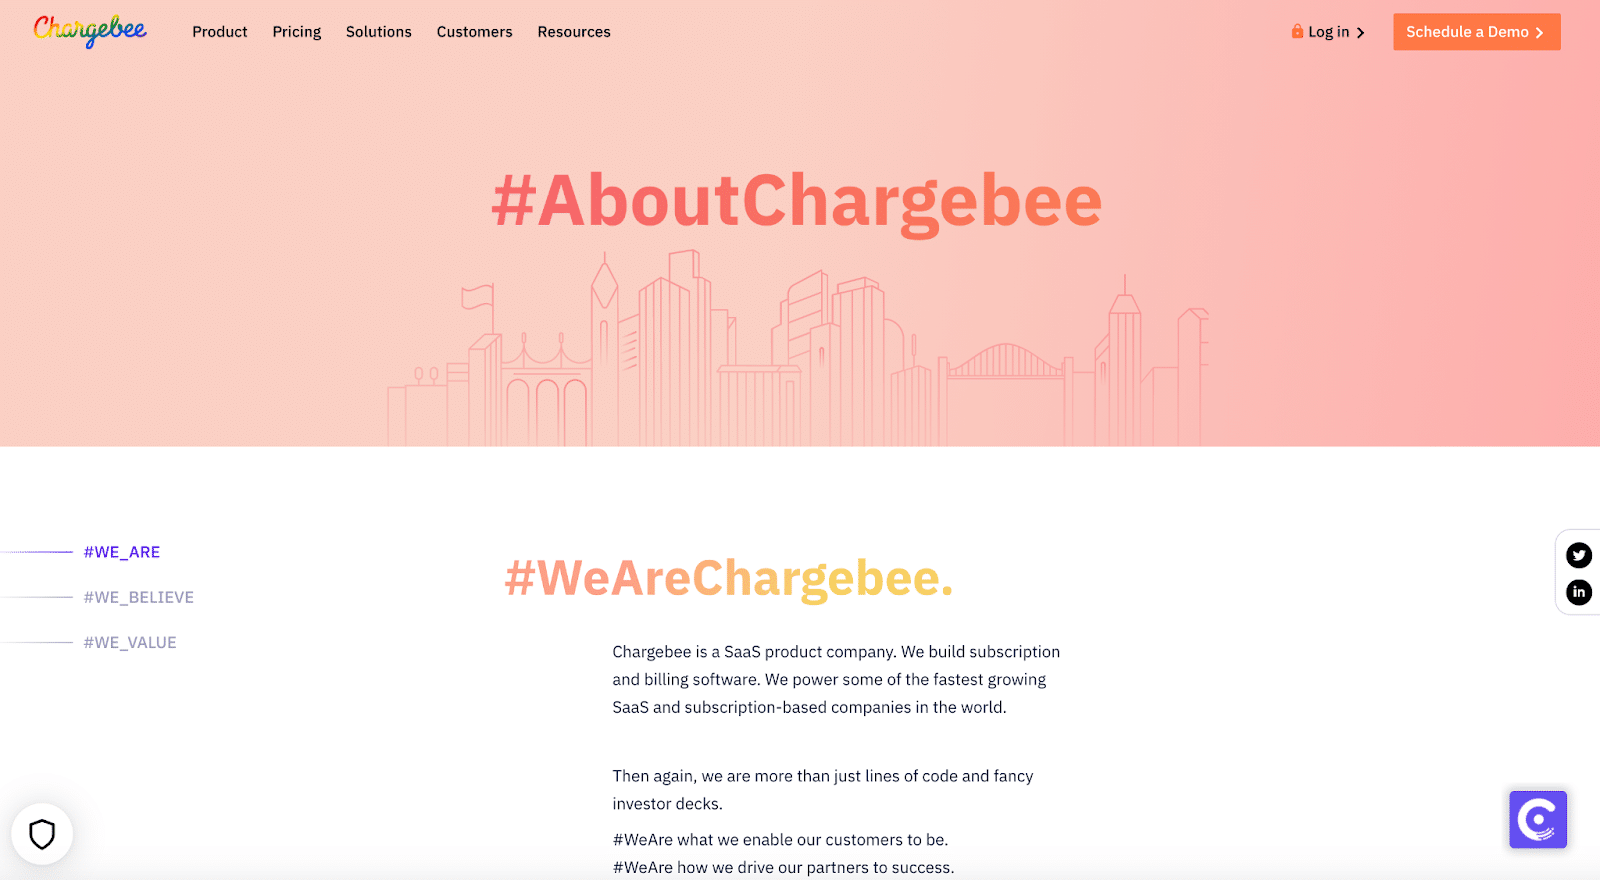 Chargbee’s About Us page is an essential component of its site.